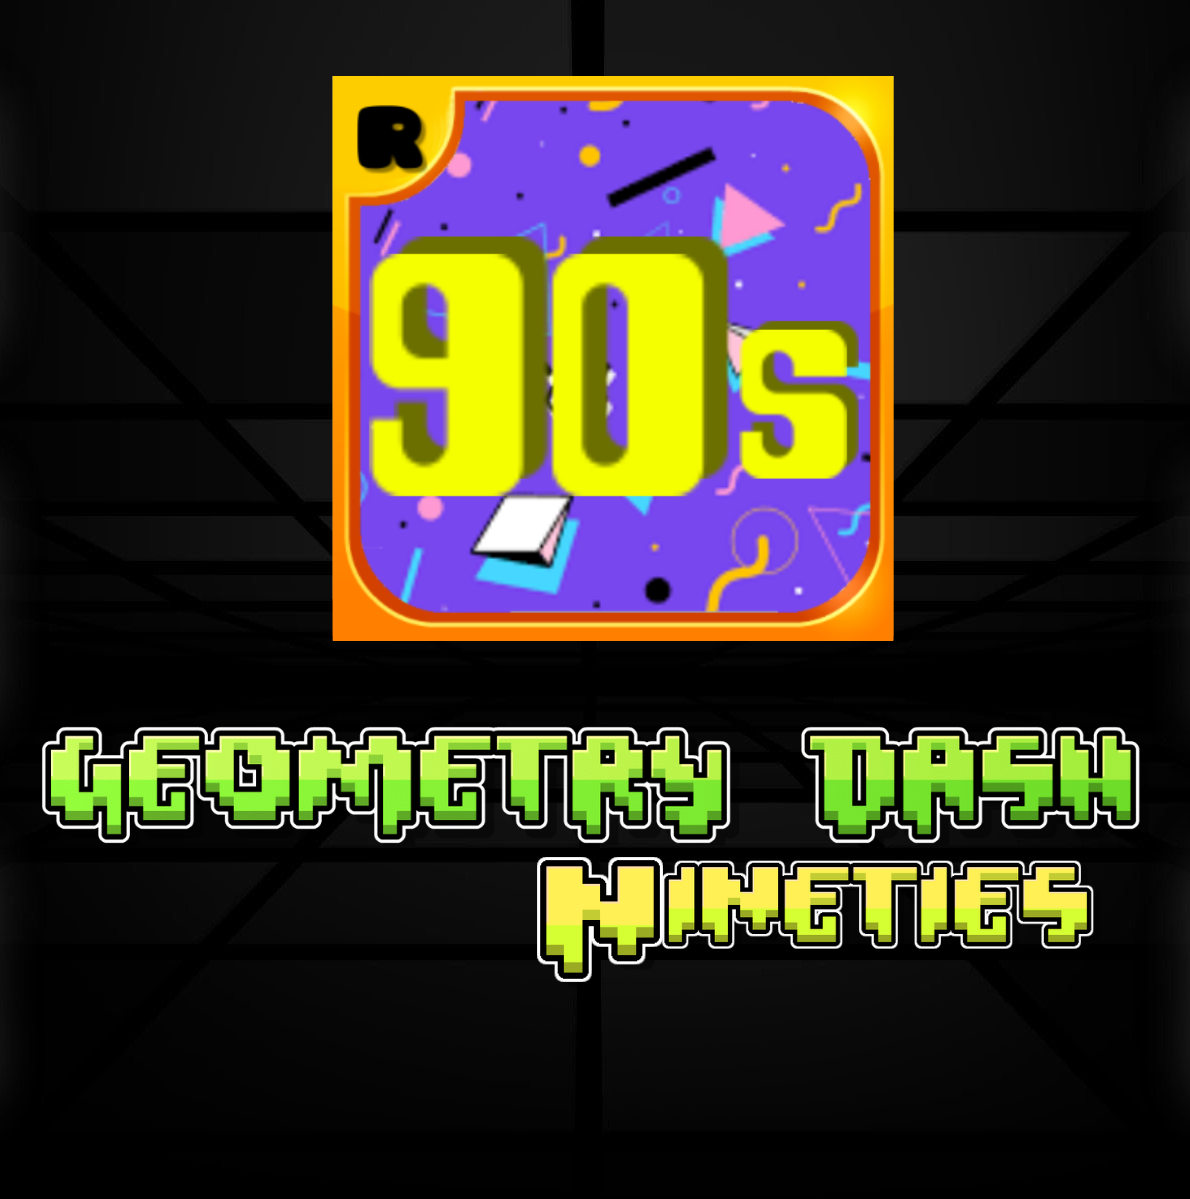 https://static.wikia.nocookie.net/geometry-dash-fan-ideas/images/4/41/Geometry_Dash_Nineties.png/revision/latest?cb=20210802215508